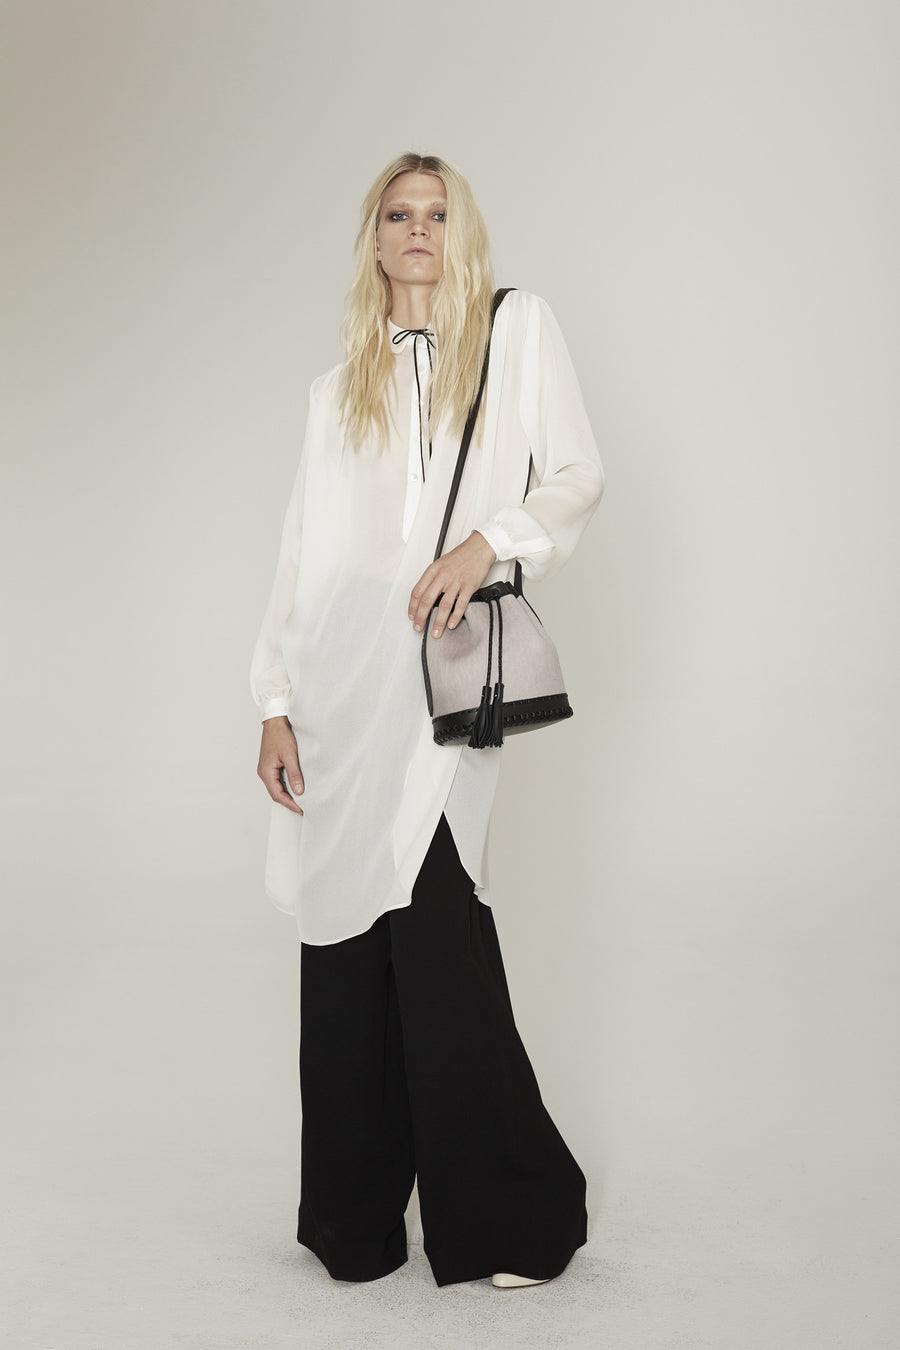 Chelsea Danielle Wichmann Model Silk Night Shirt & Relax Wide Leg Pants Wendy Nichol Clothing Fashion Designer handmade in NYC runway ready to wear show SS15 Space Master Oversized Sheer Transparent White Silk Blouse button collar long Sleeve Silk Wide leg High waist waisted pants Made to Measure Made to Order Custom Tailoring Bespoke